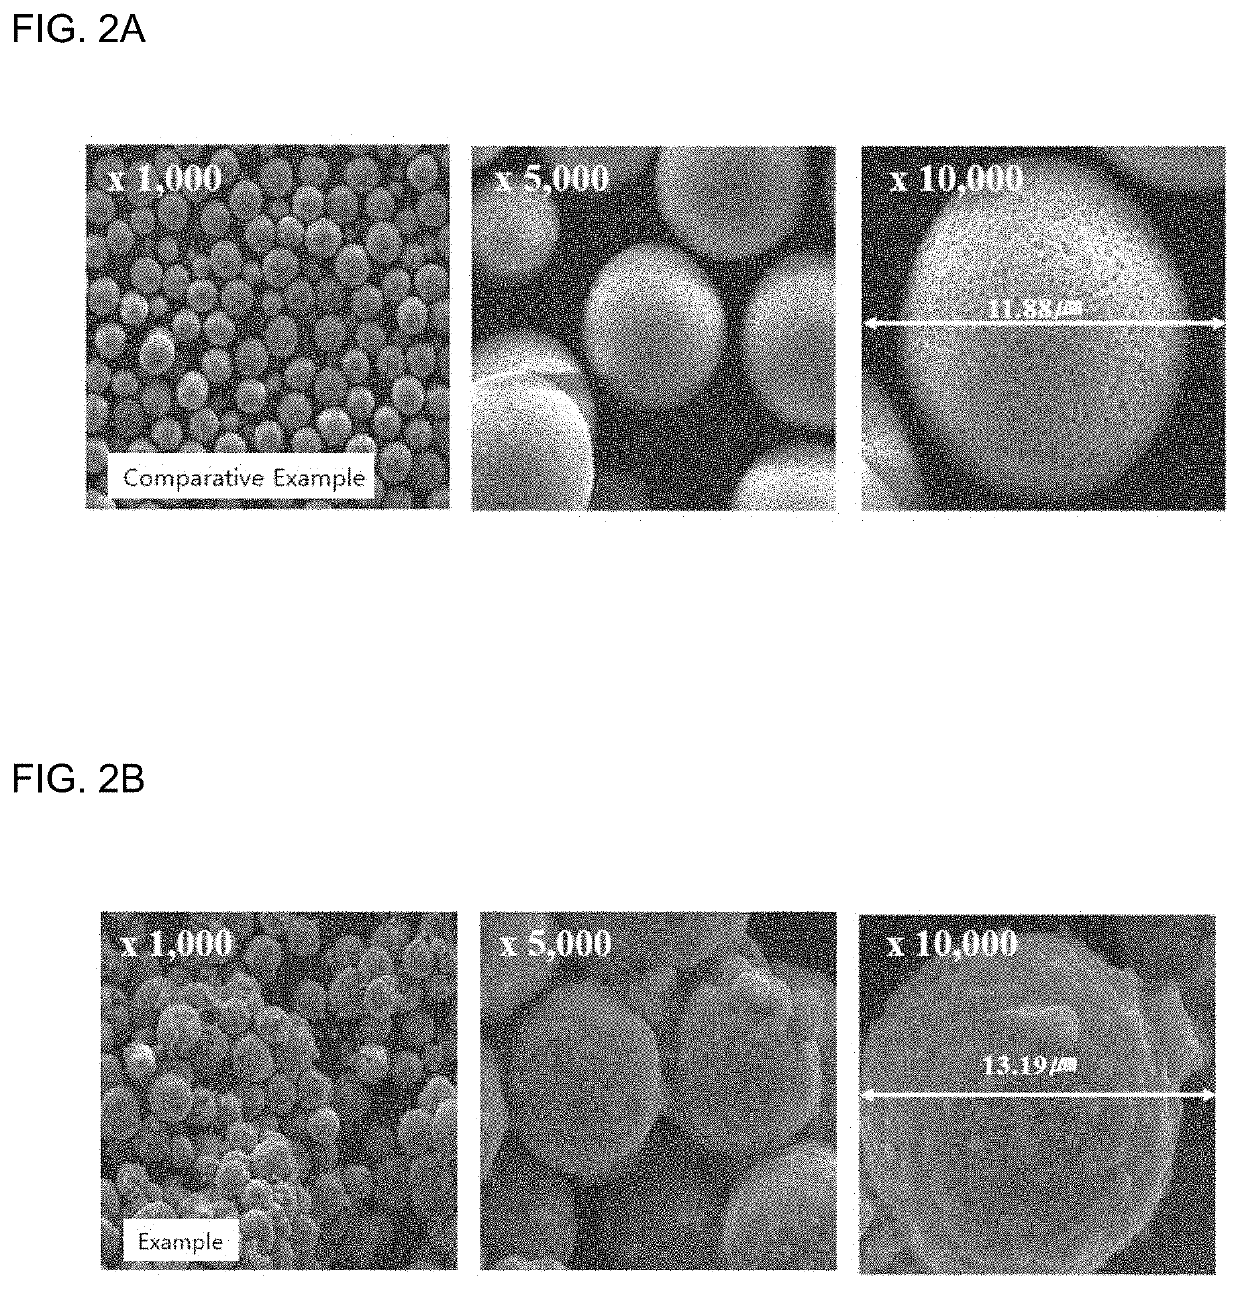 METHOD OF PREPARING CARBON-COATED CATHODE ACTIVE MATERIAL BASED ON XLi2MNO3-(1-X)LiMO2 (M IS TRANSITION METAL SUCH AS NI, CO, OR MN) FOR LITHIUM SECONDARY BATTERY